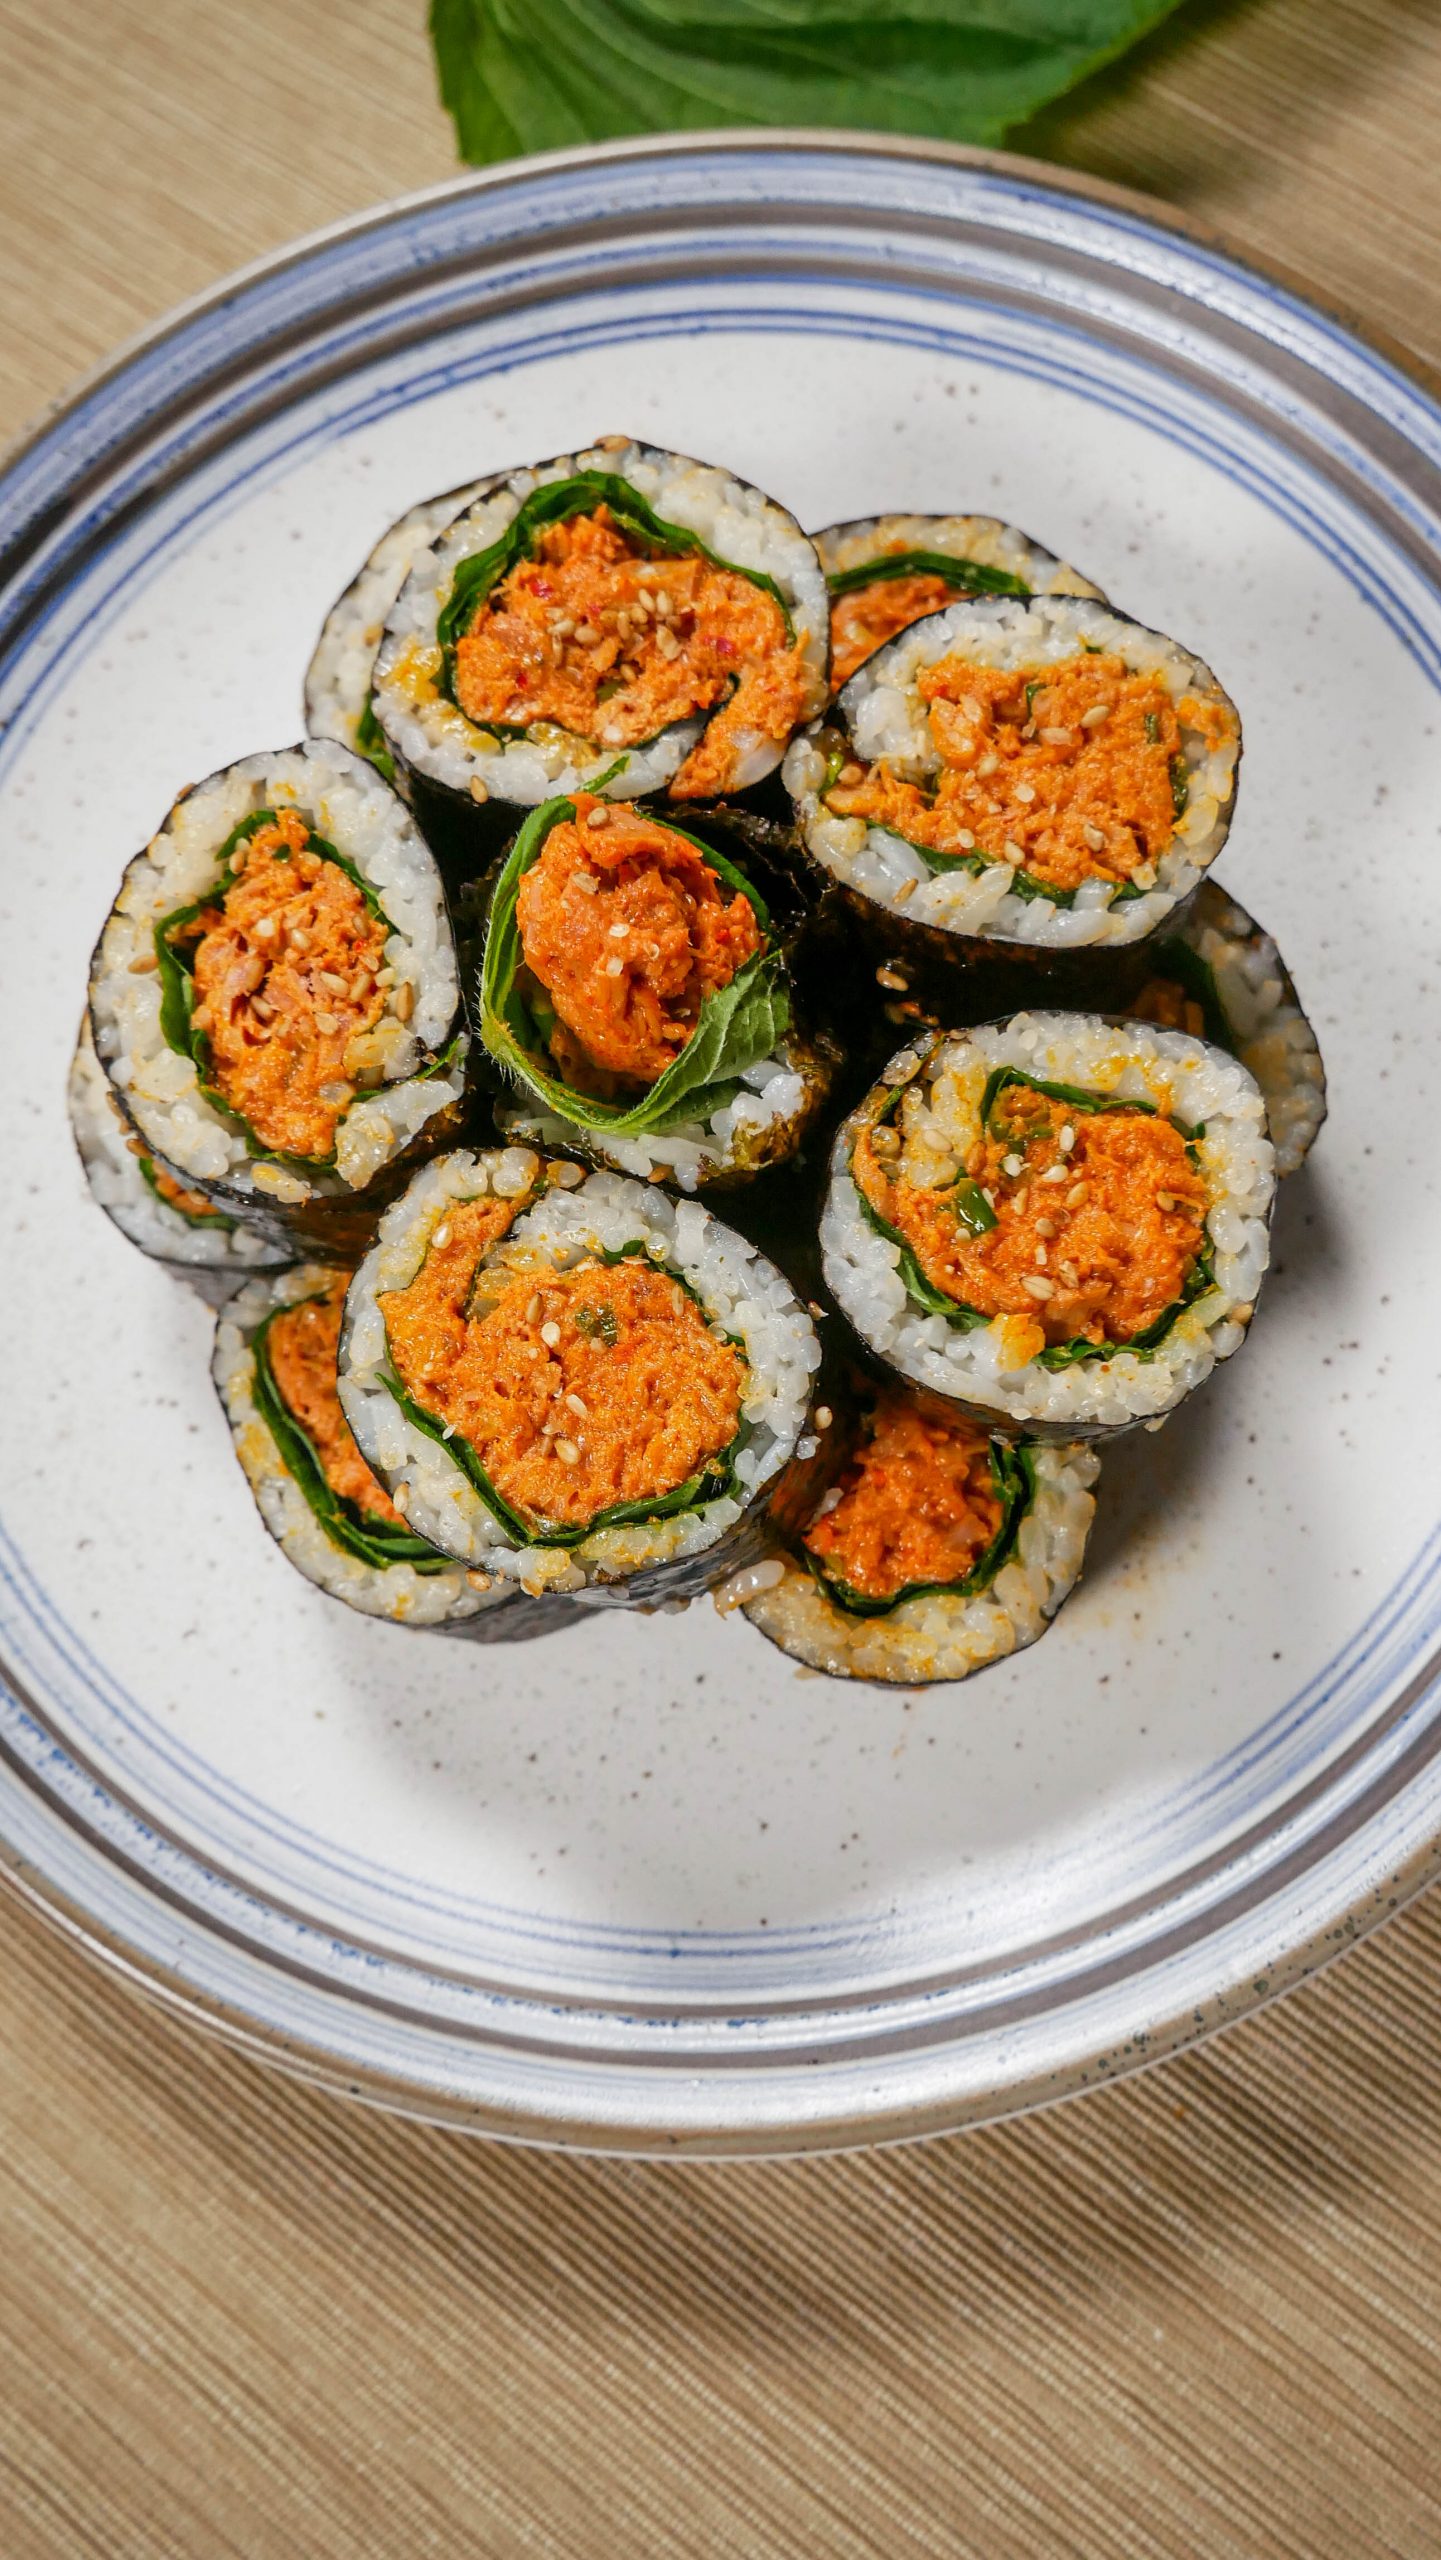 https://jeccachantilly.com/wp-content/uploads/2022/03/spicy-tuna-kimbap-2-compressed-scaled.jpg